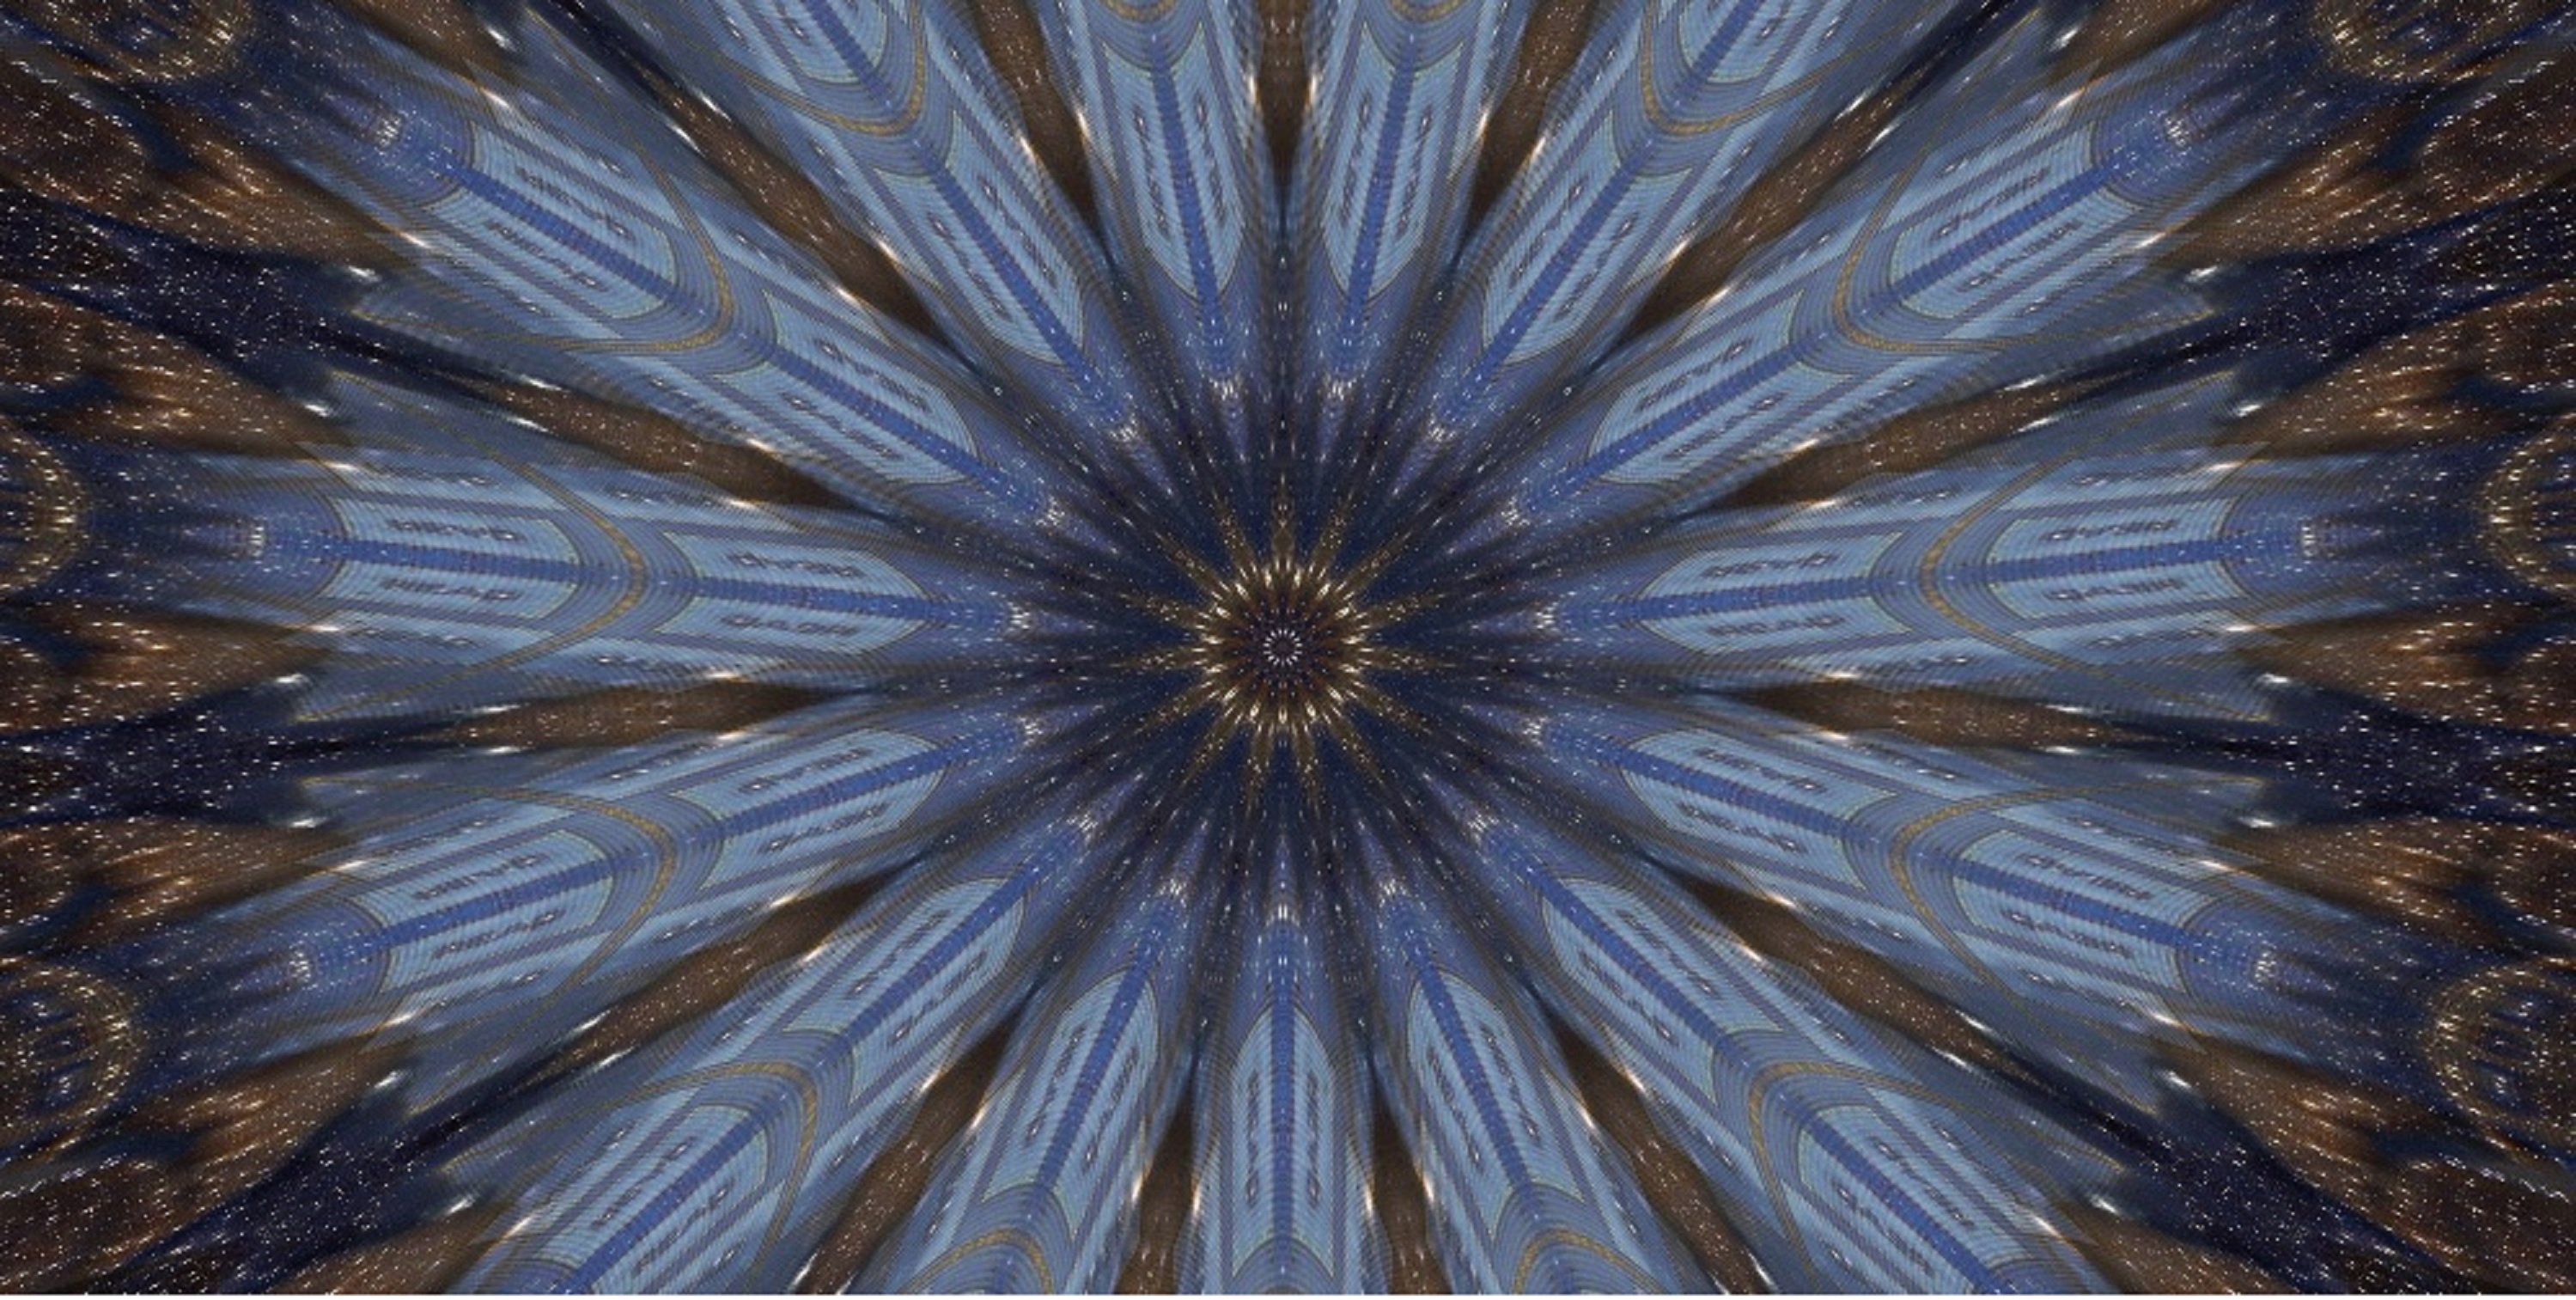 Photo taken by me with crop, Space, surreal and Kaleidoscope x 15 on Lunapic